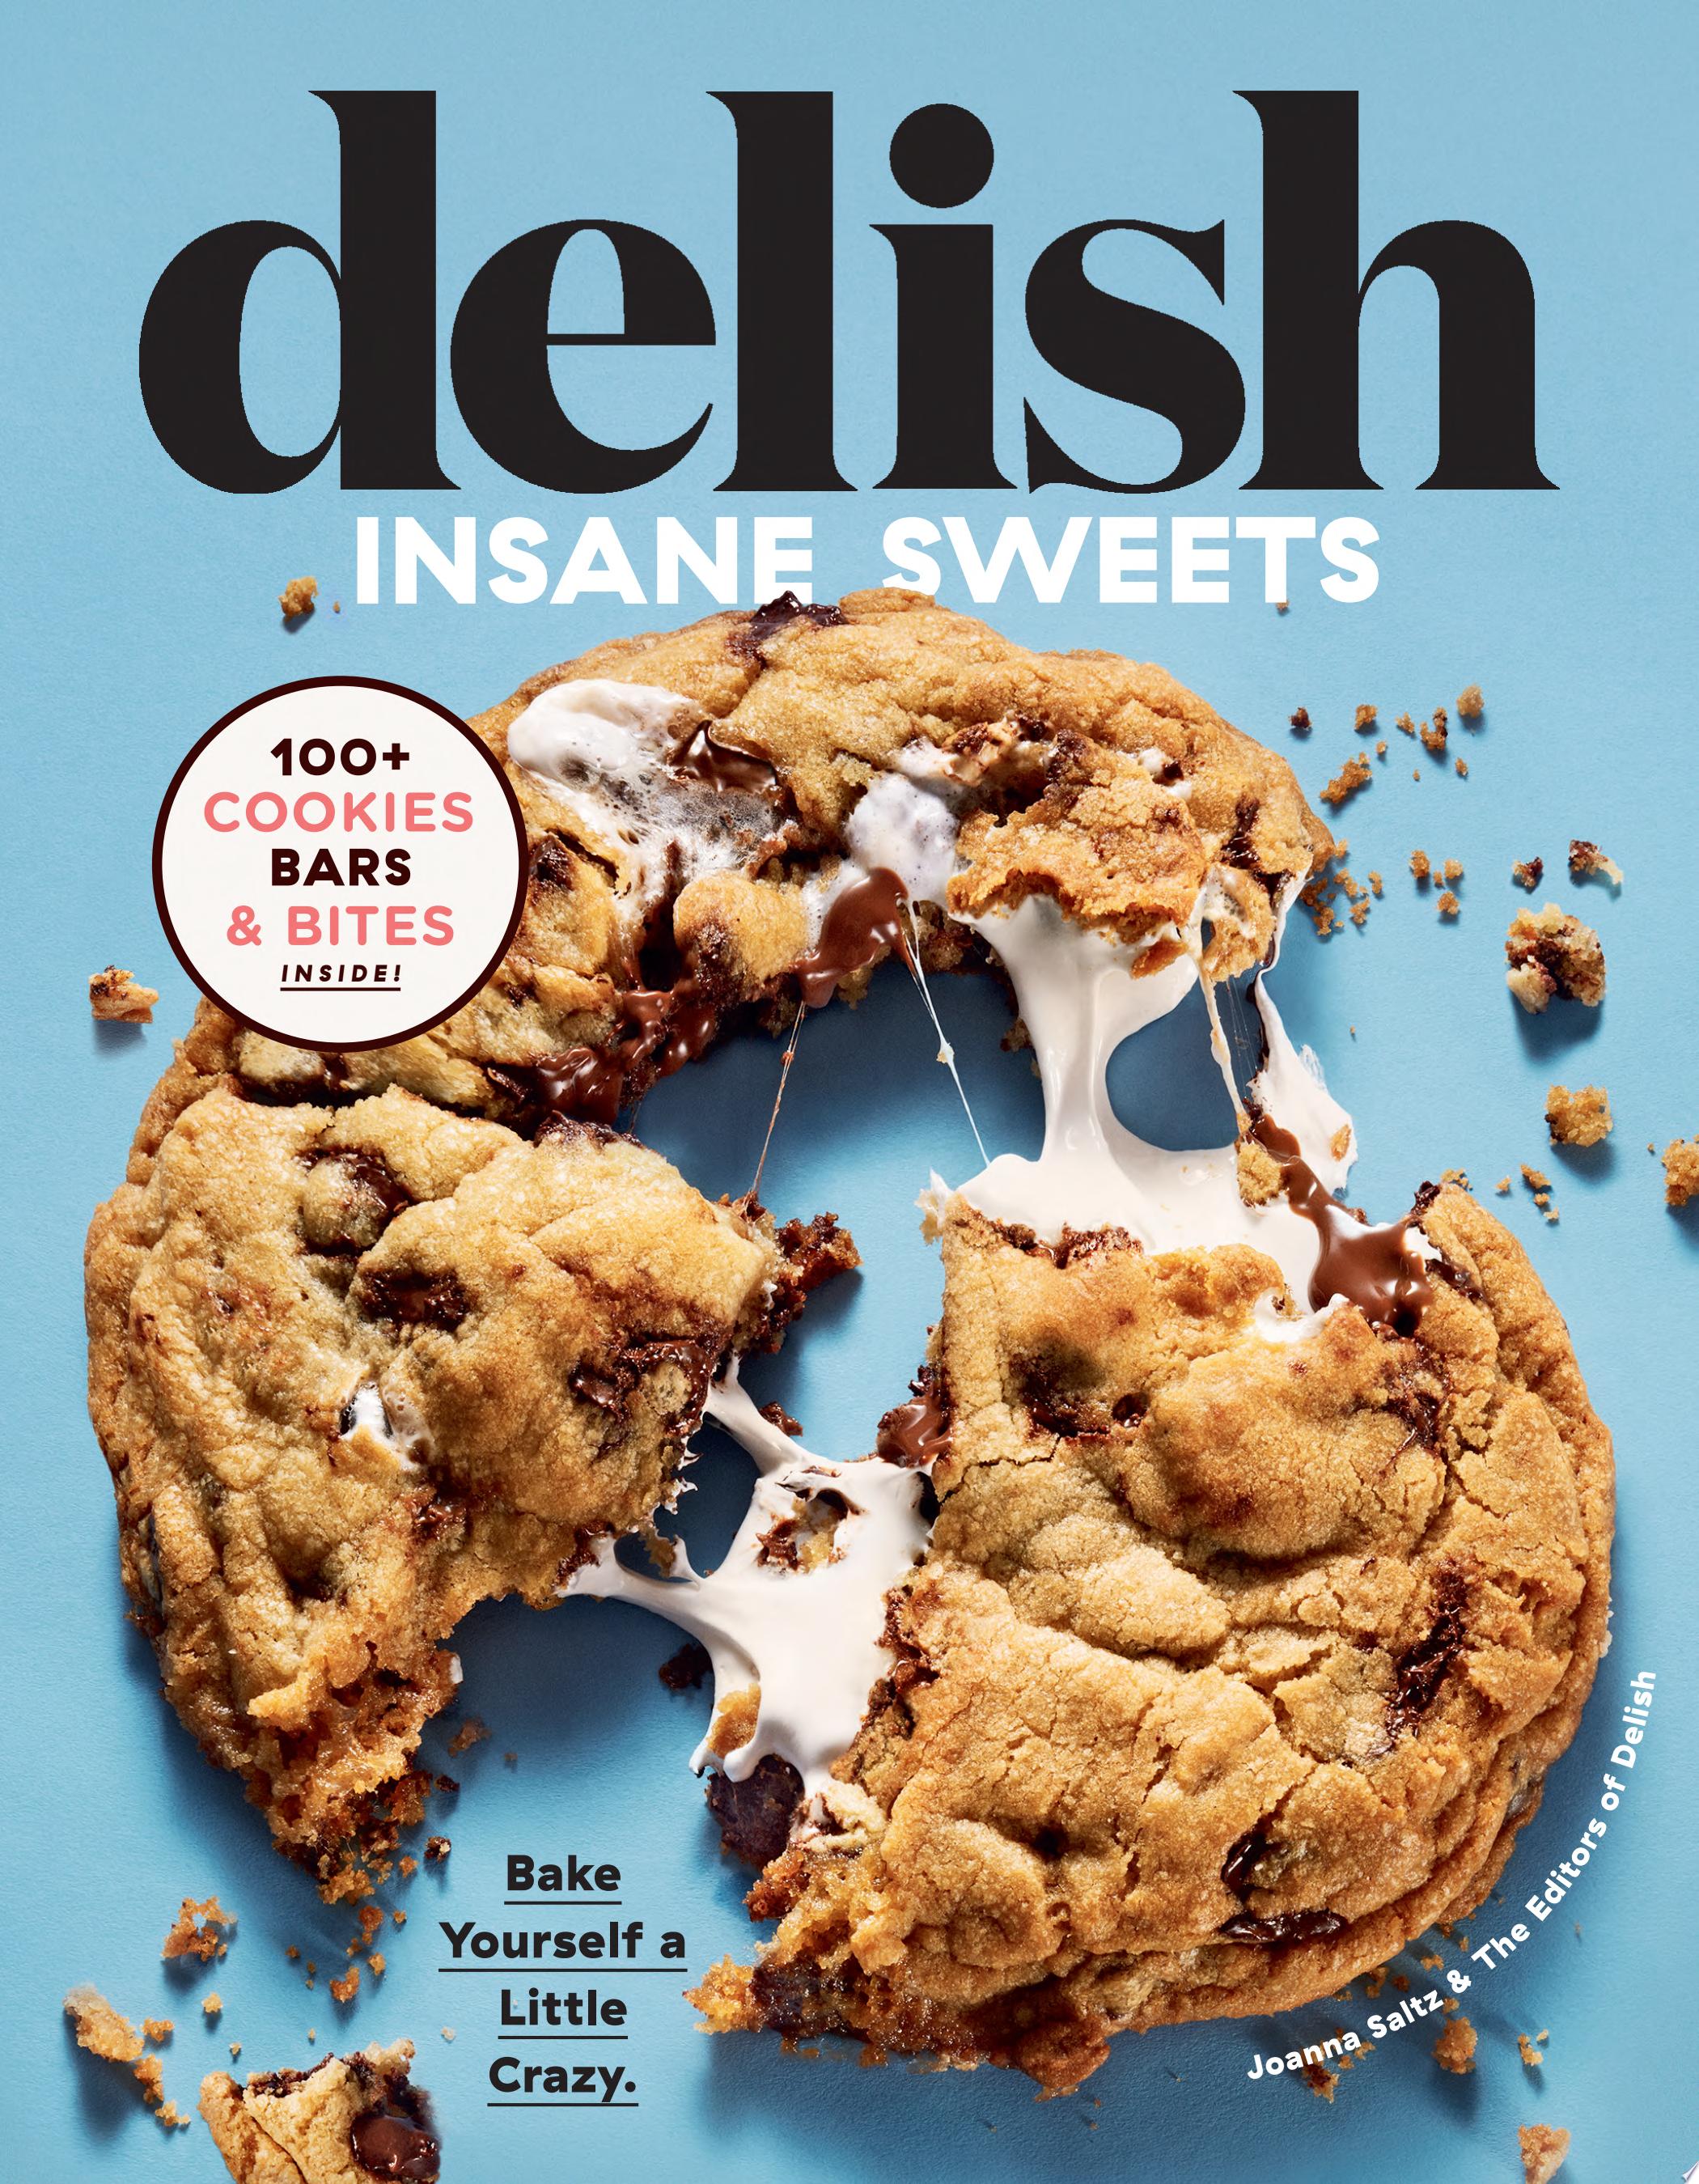 Image for "Delish Insane Sweets"